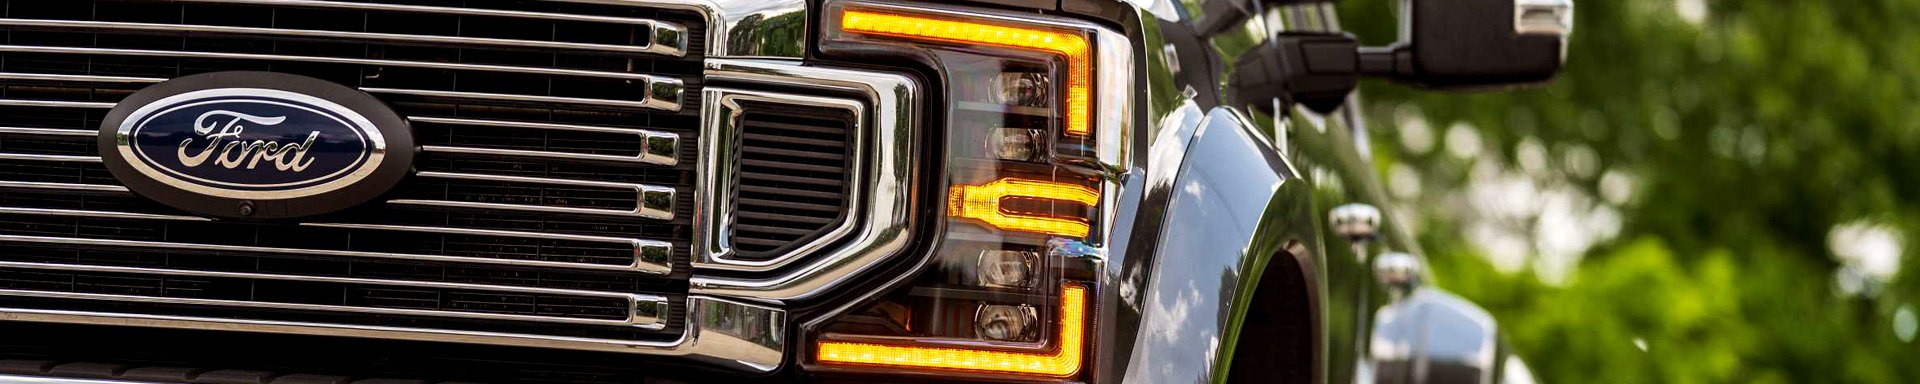 upgrade-your-ford-super-duty-truck-with-new-morimoto-xb-projector-led-headlights-collage_0.jpg